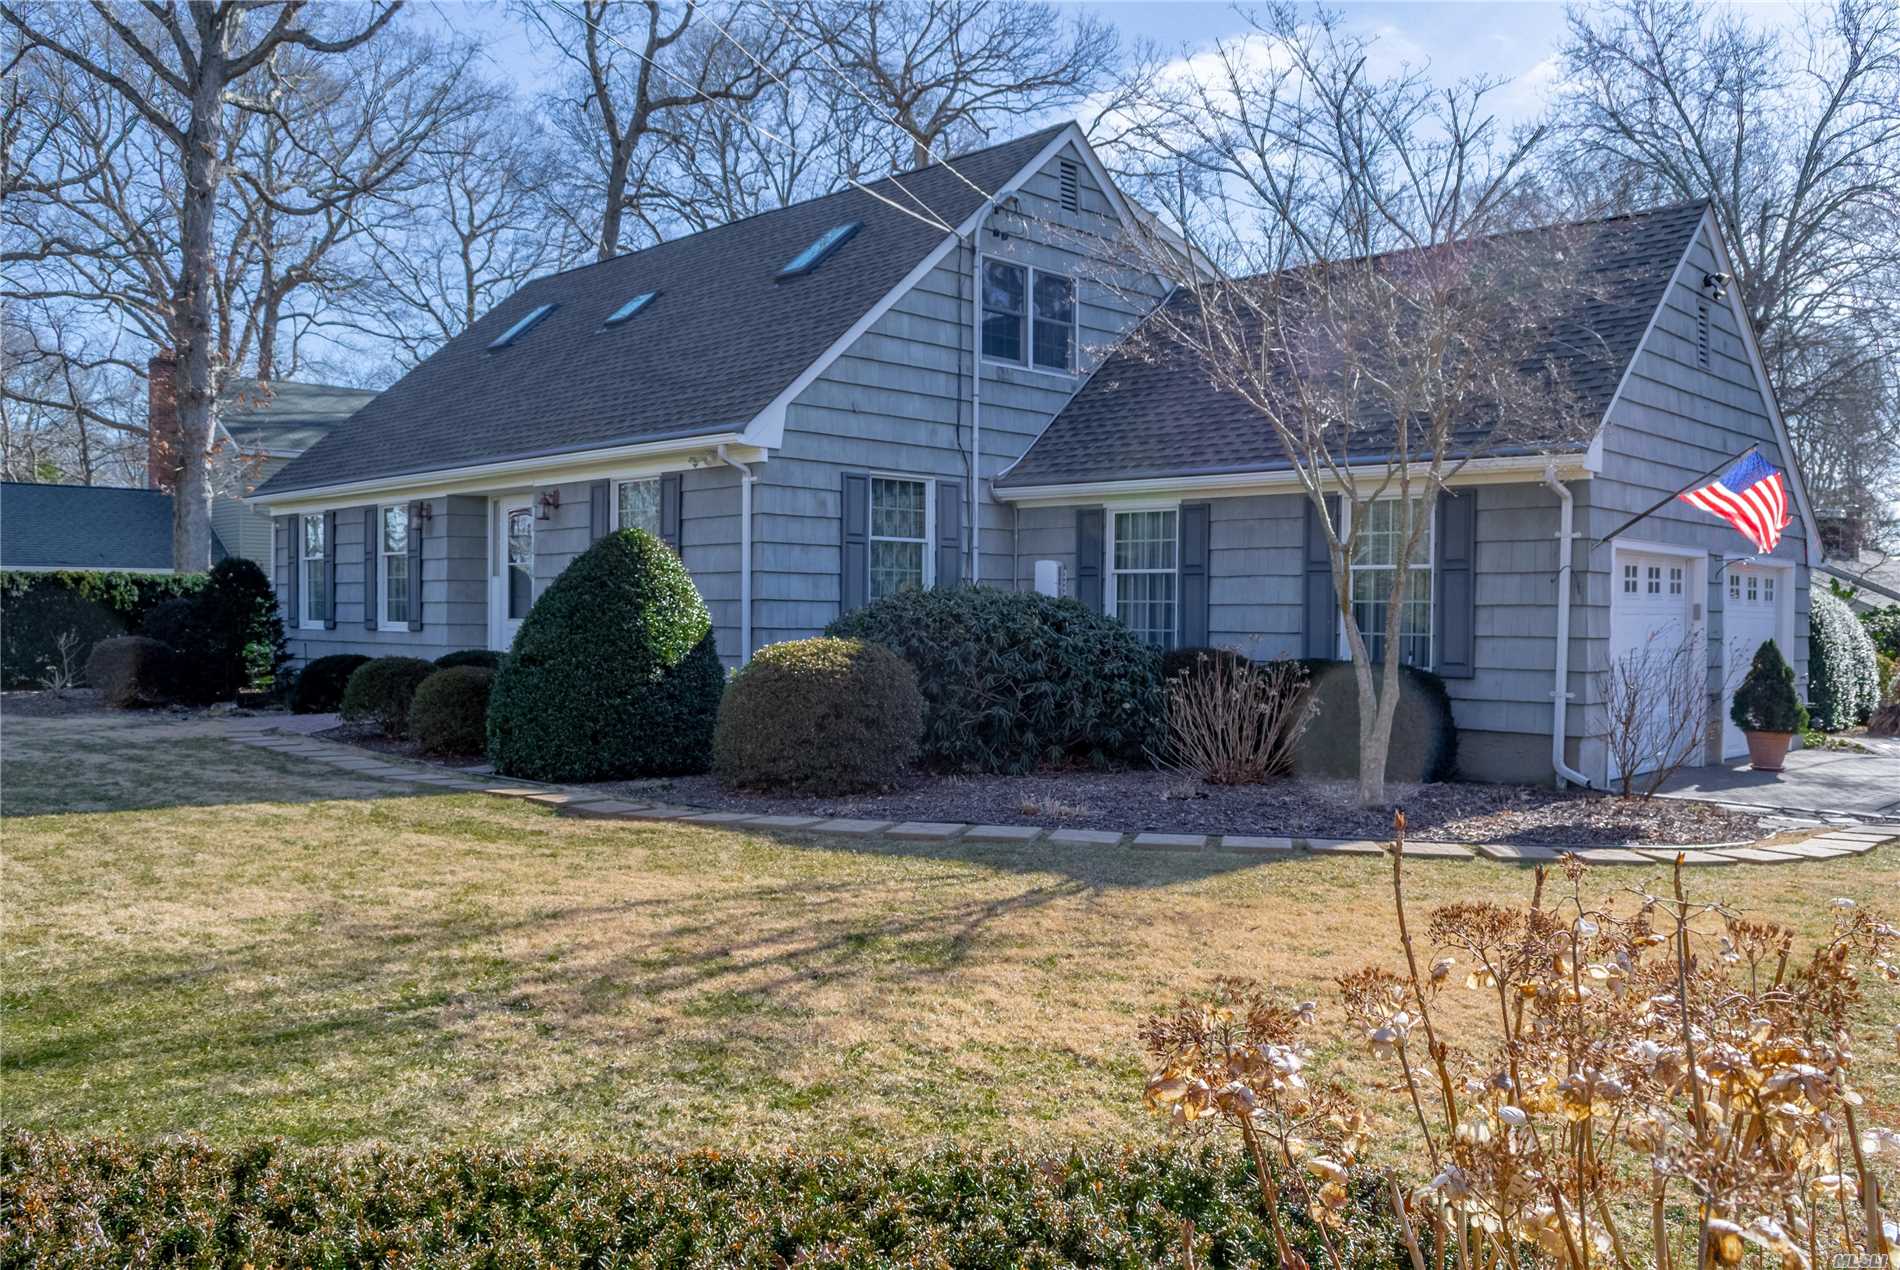 Baywoods! Deeded Bay Beach And Deeded Boat Slip! Landscaped Cape For Privacy. 4 Bedrooms, 2 Baths, Formal Living Room,  Formal Dining Room, Family Room With Fireplace And Eat In Kitchen. Inground Pool With New Deck Around It. Full Basement And 2.5 Car Garage.